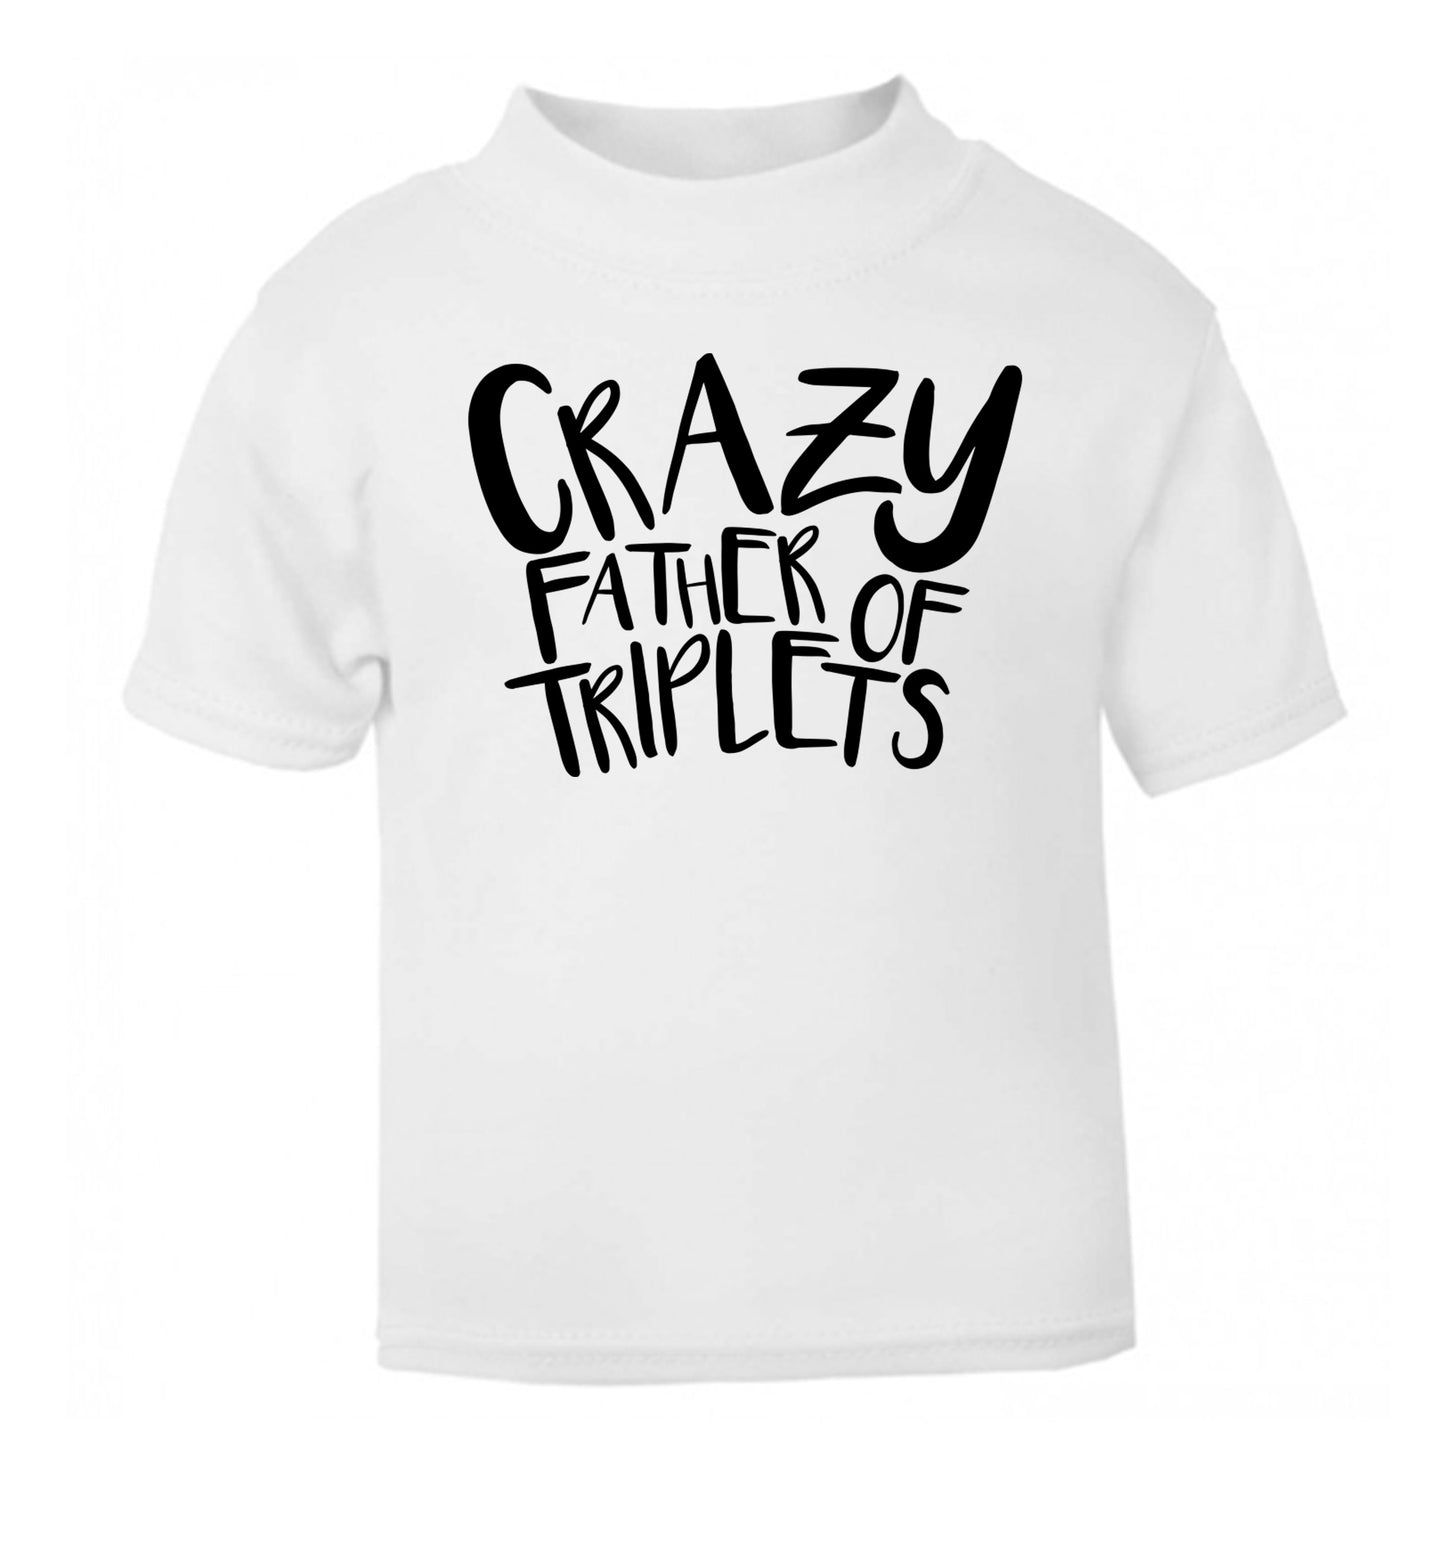 Crazy father of triplets white Baby Toddler Tshirt 2 Years